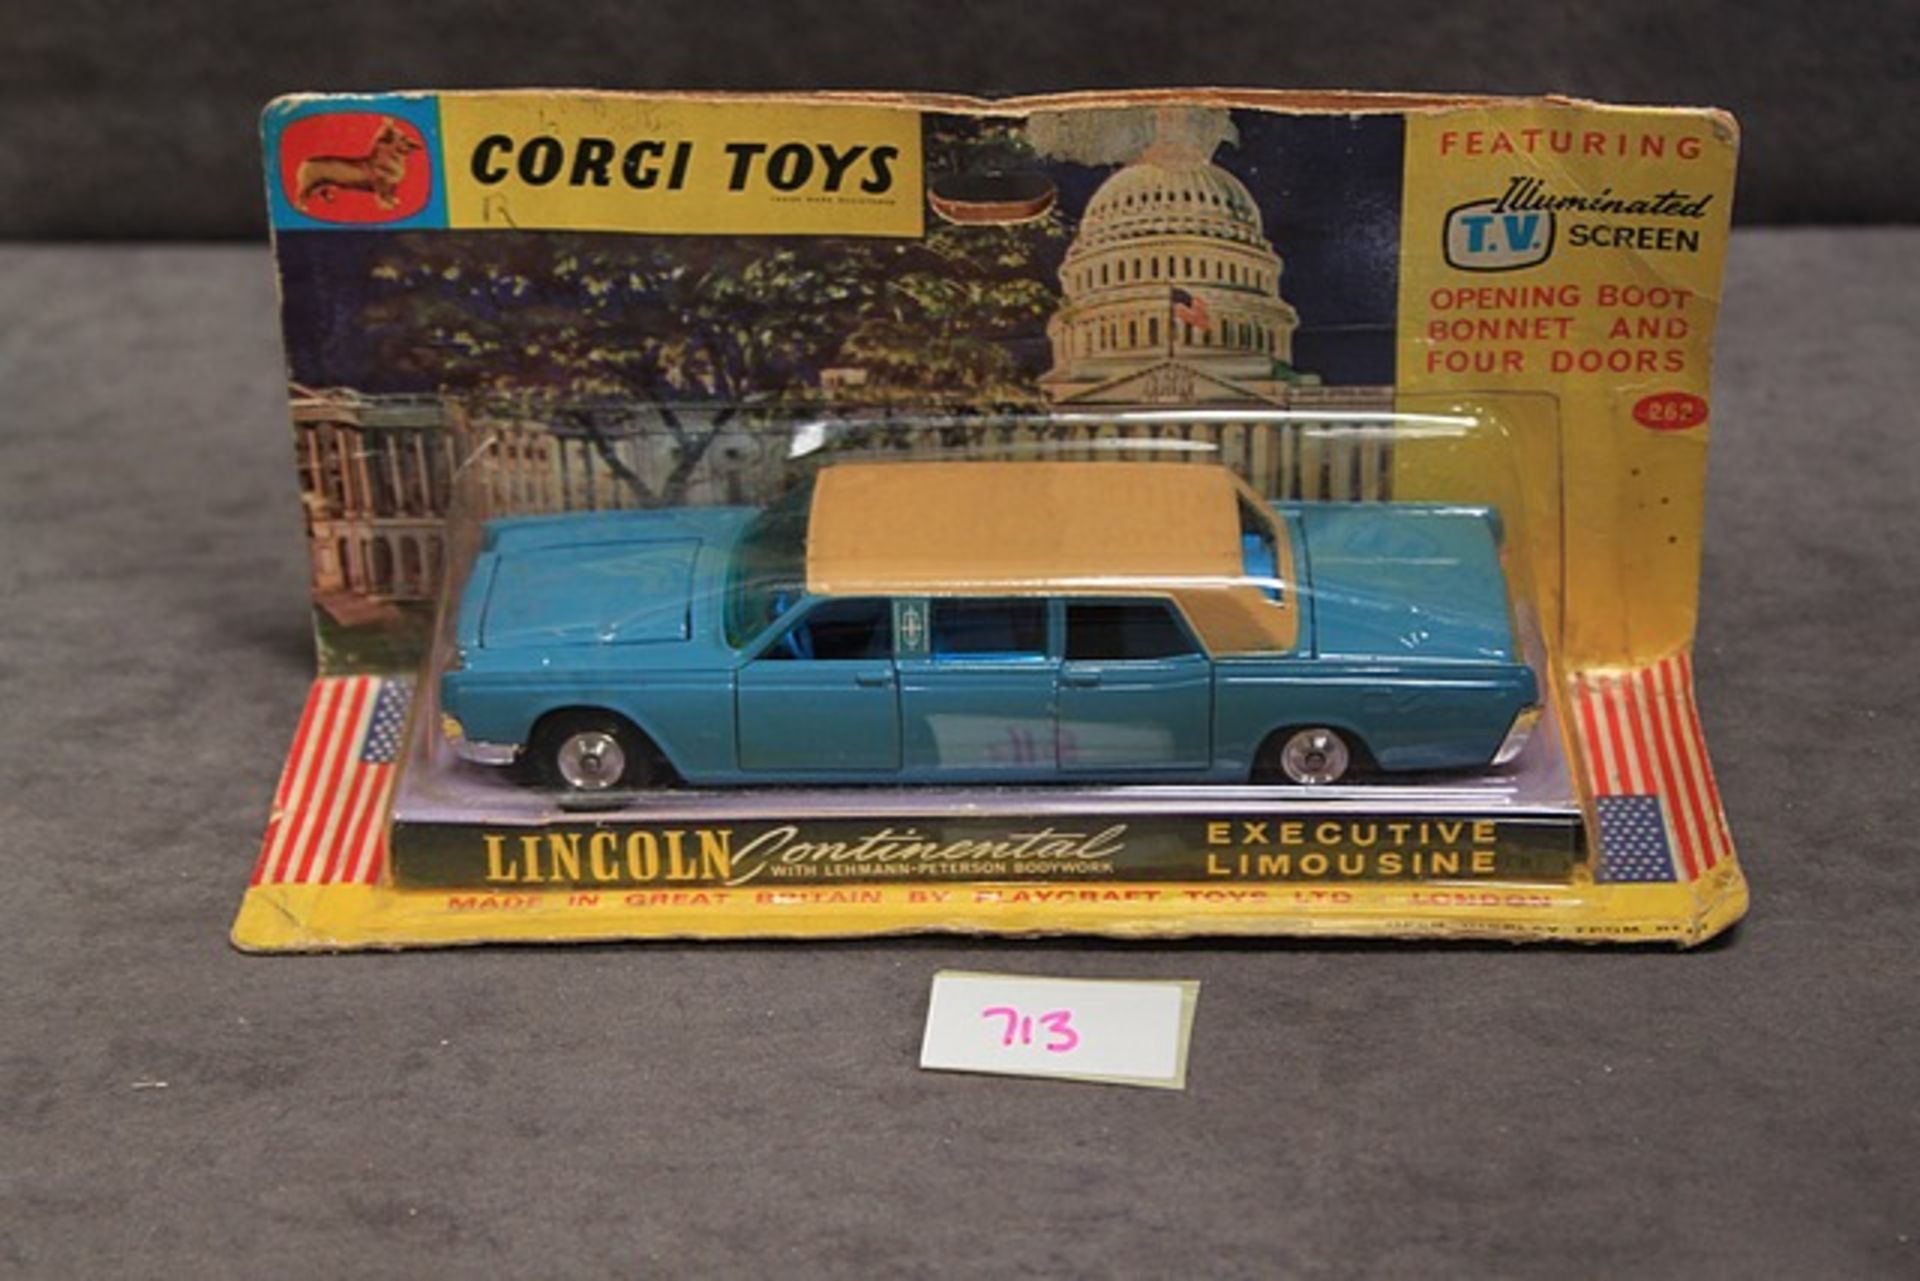 Rare Mint Corgi diecast #262 Lincoln Continental Executive Limousine in Blue with a brown roof on - Image 2 of 2